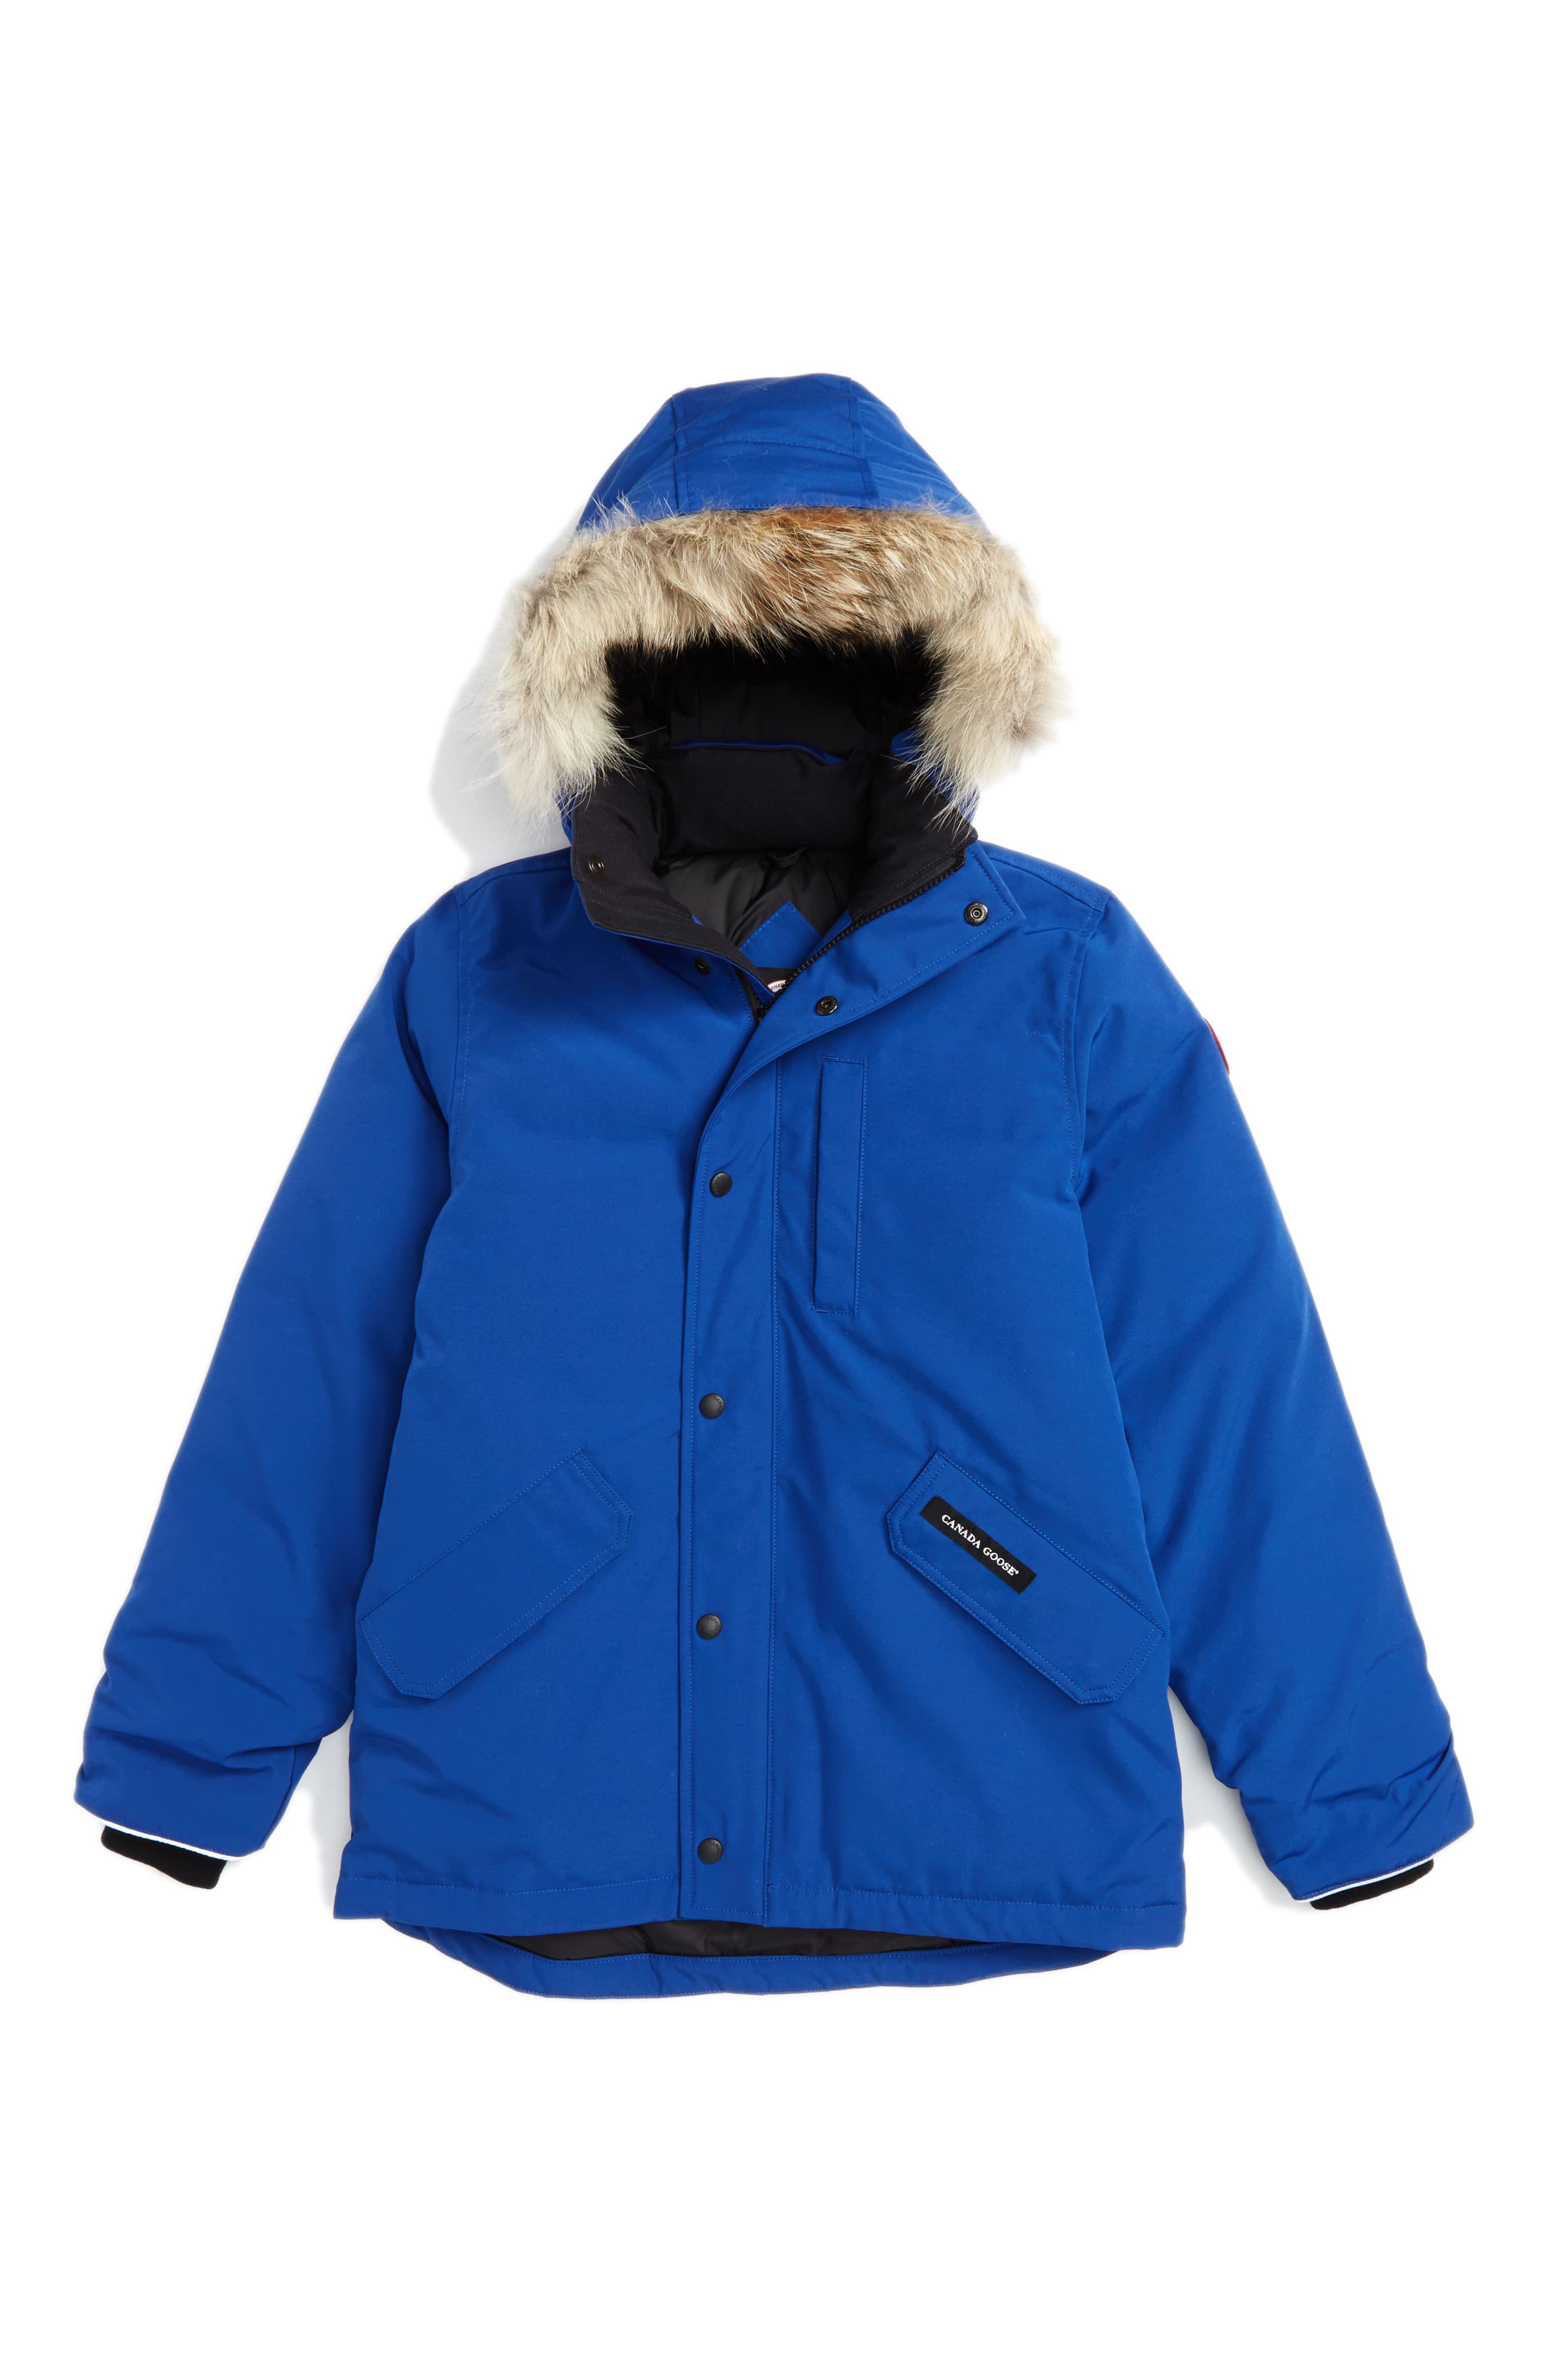 Canada Goose ‘Logan’ Down Parka With Genuine Coyote Fur Trim | The ...